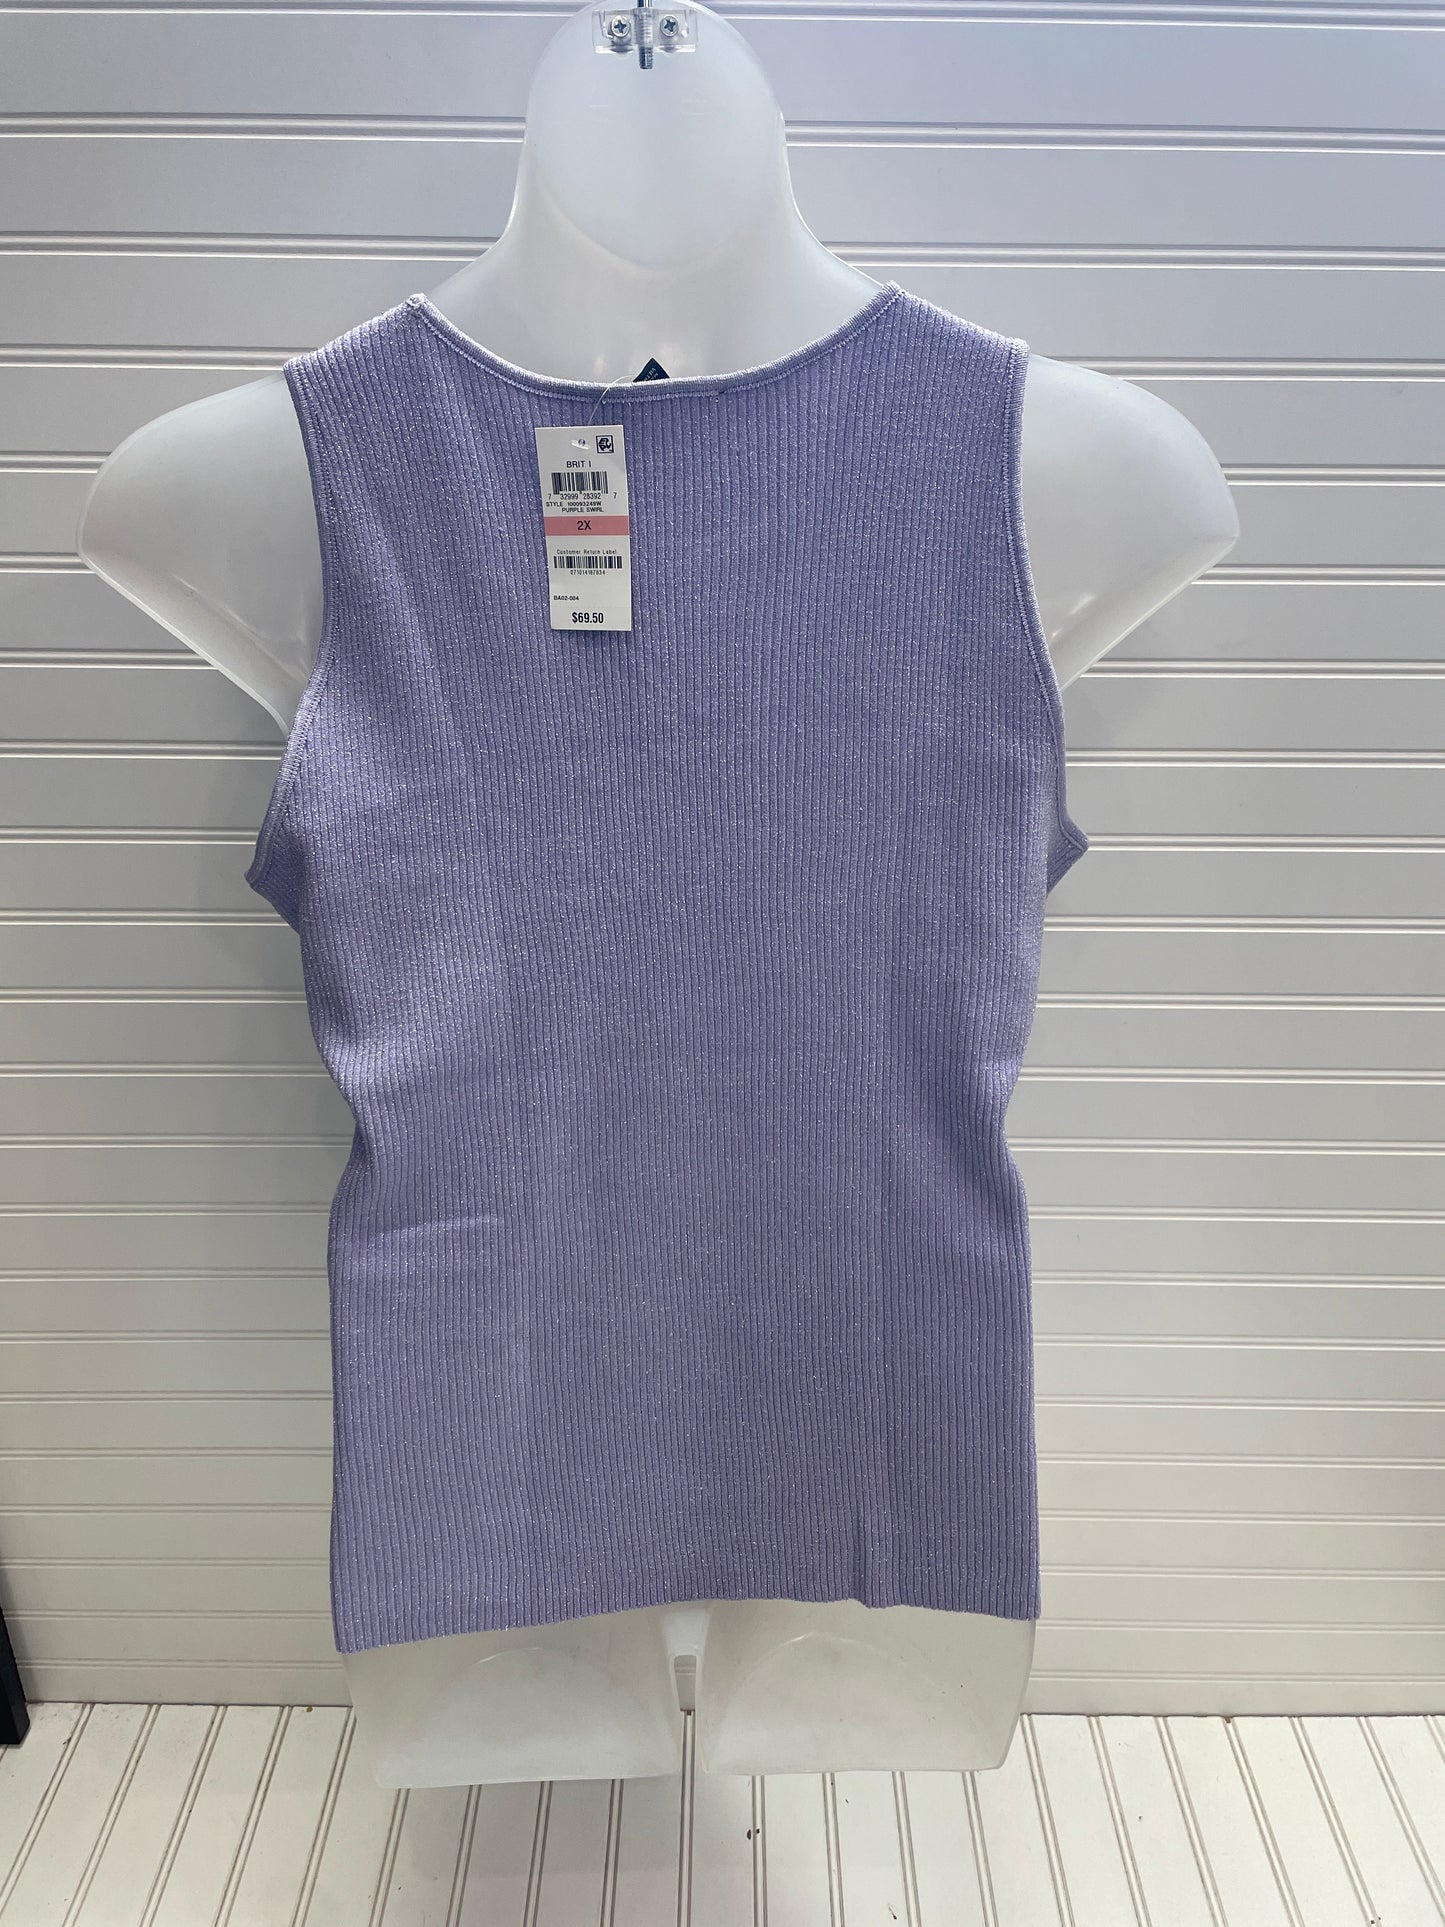 Top Sleeveless By Inc  Size: 2x